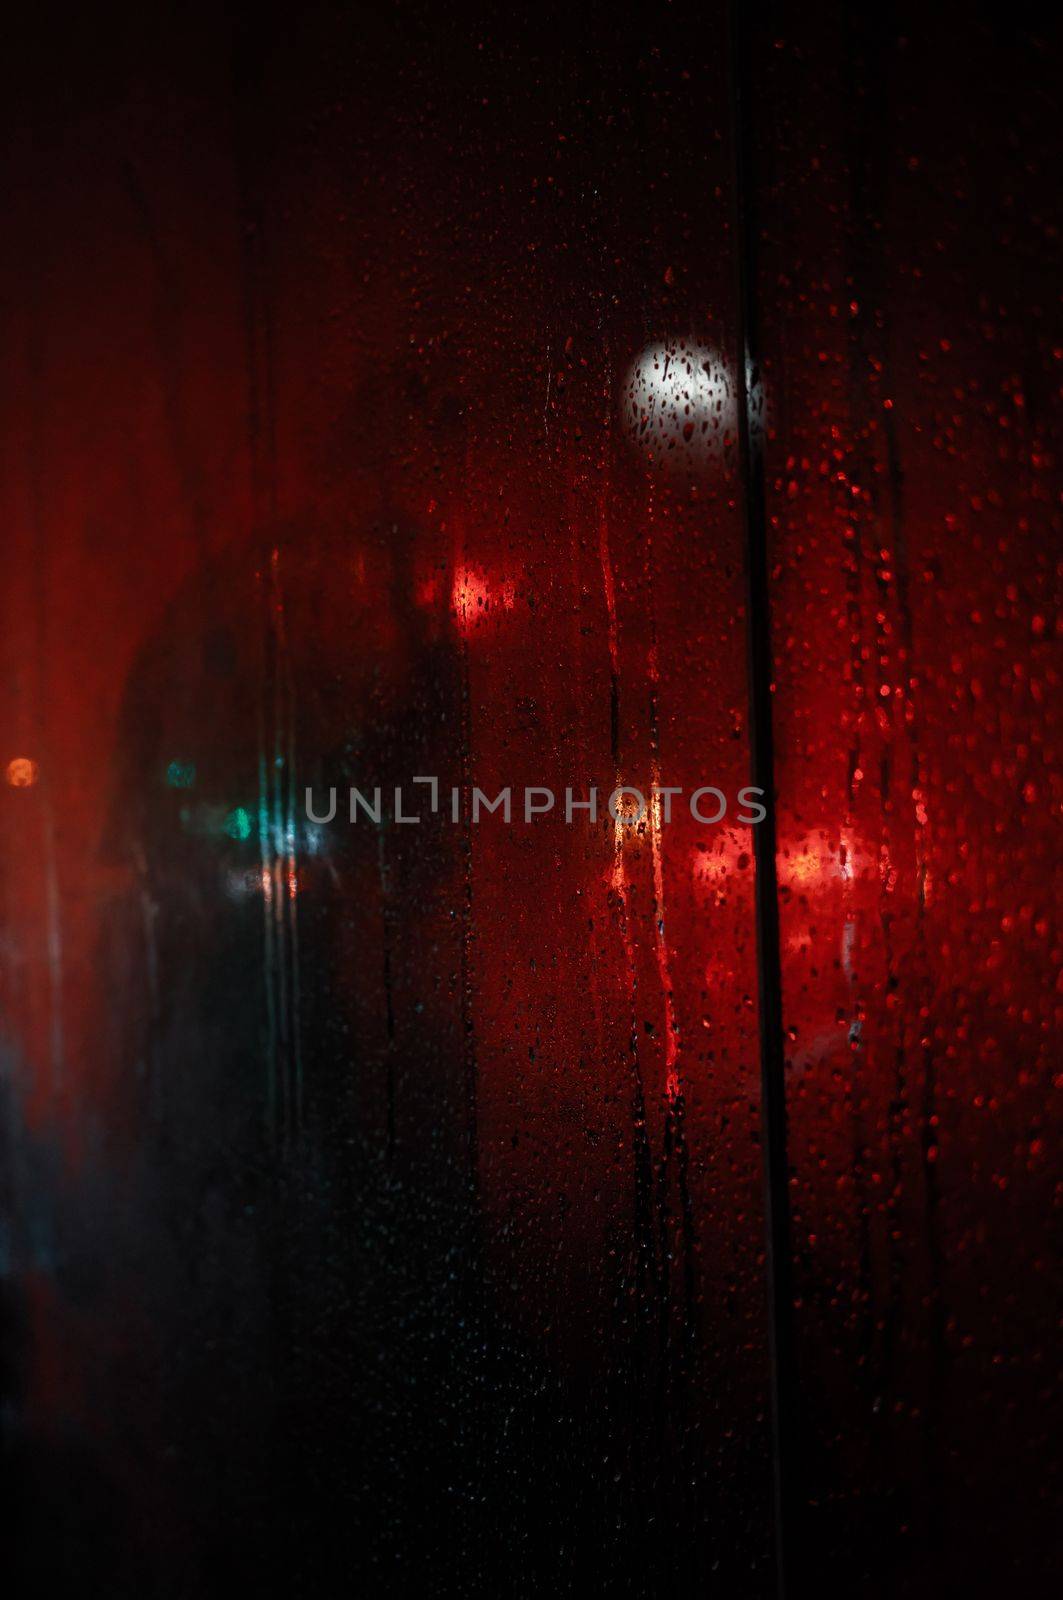 Blackout in Kyiv. Glass showcases with raindrops and sleet by palinchak